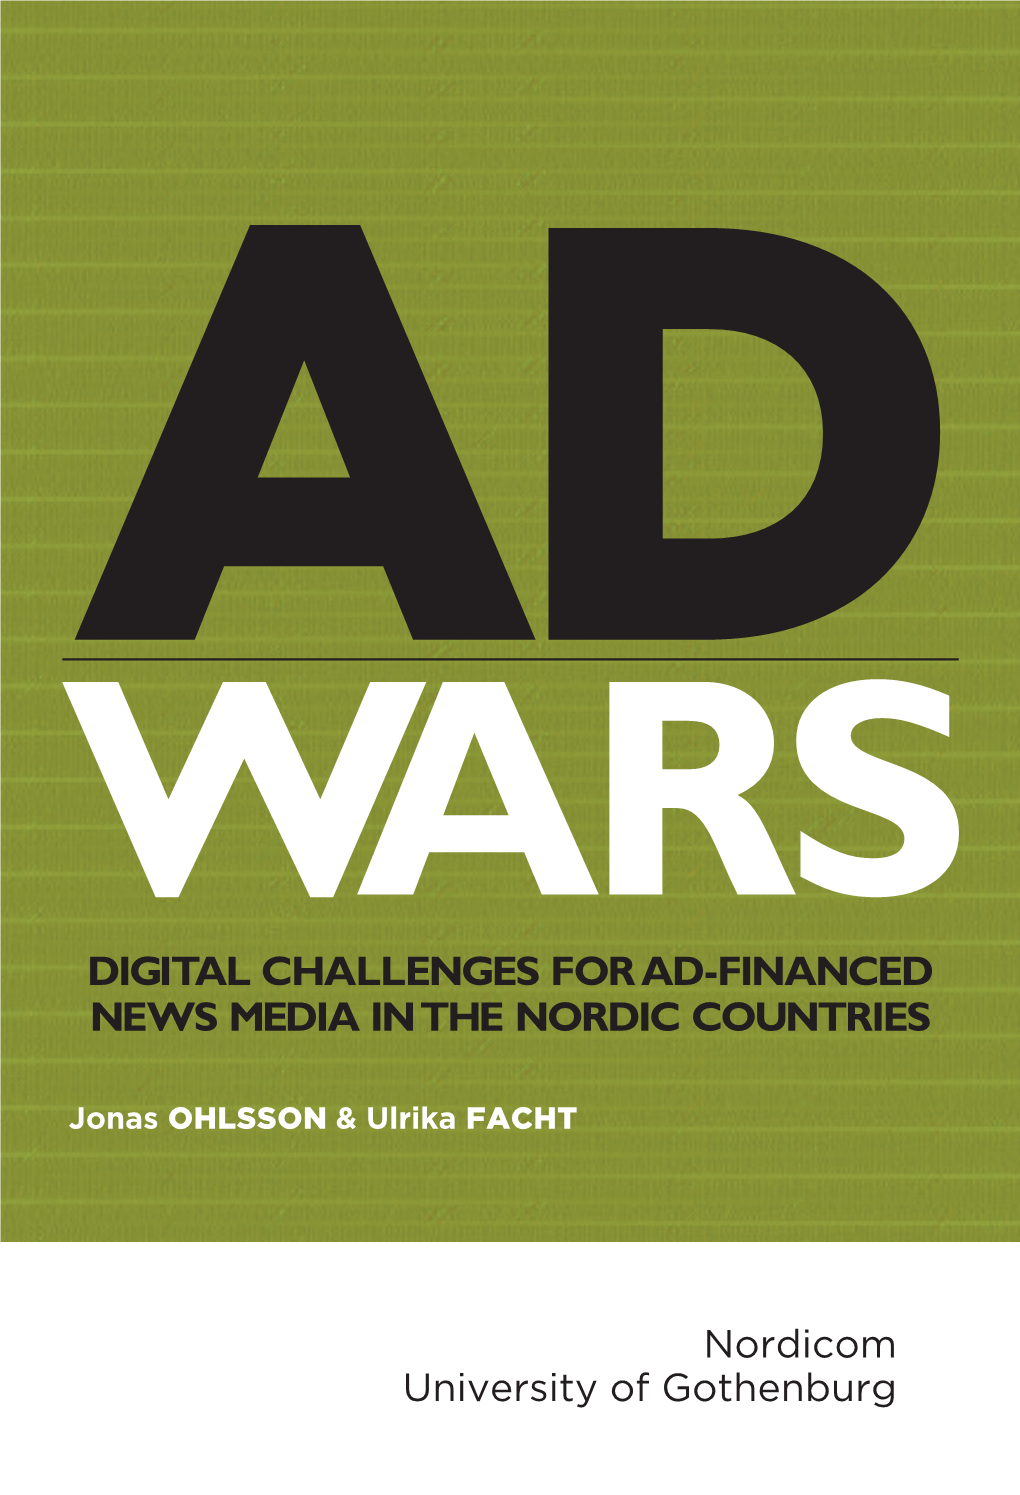 Digital Challenges for Ad-Financed News Media in the Nordic Countries on Media Financing, Specifically the Portion of Financing That Comes from Advertisers